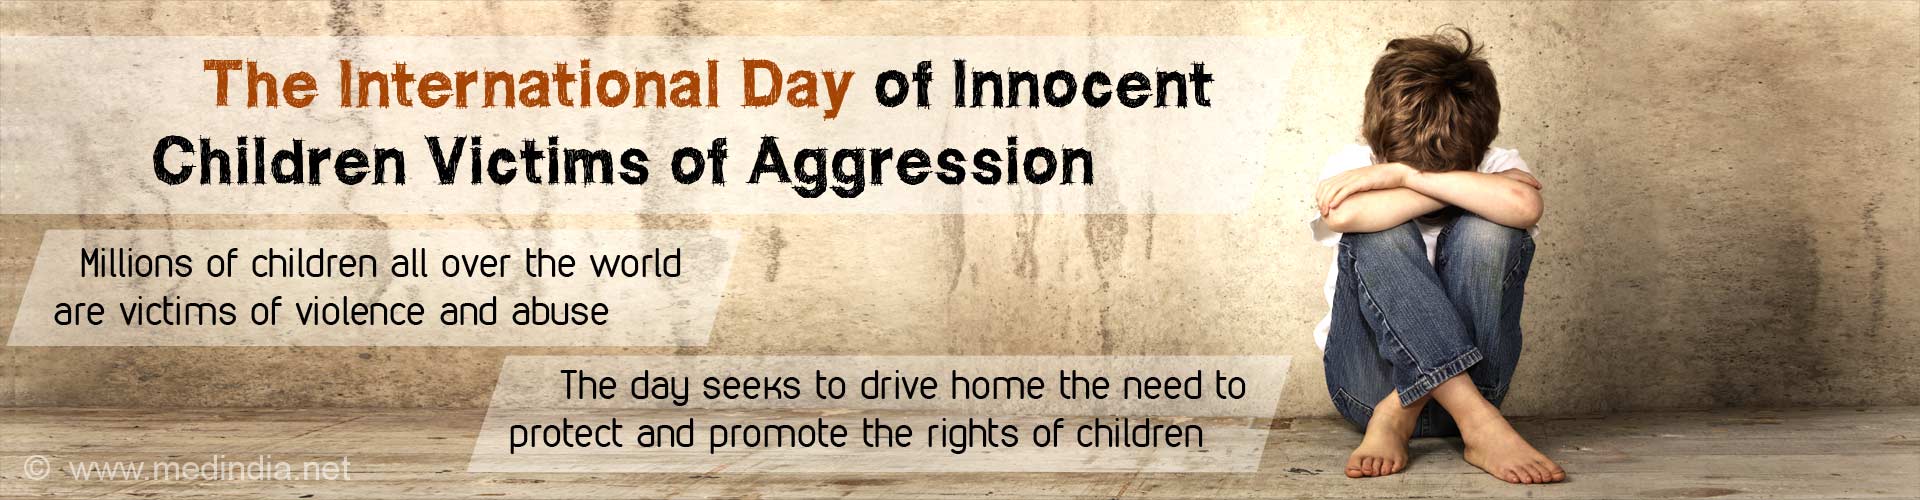 the international day of innocent children victims of aggression
- millions of children all over the world are victims of violence and abuse
- the day seeks to drive home he need to protect and promote the right of children